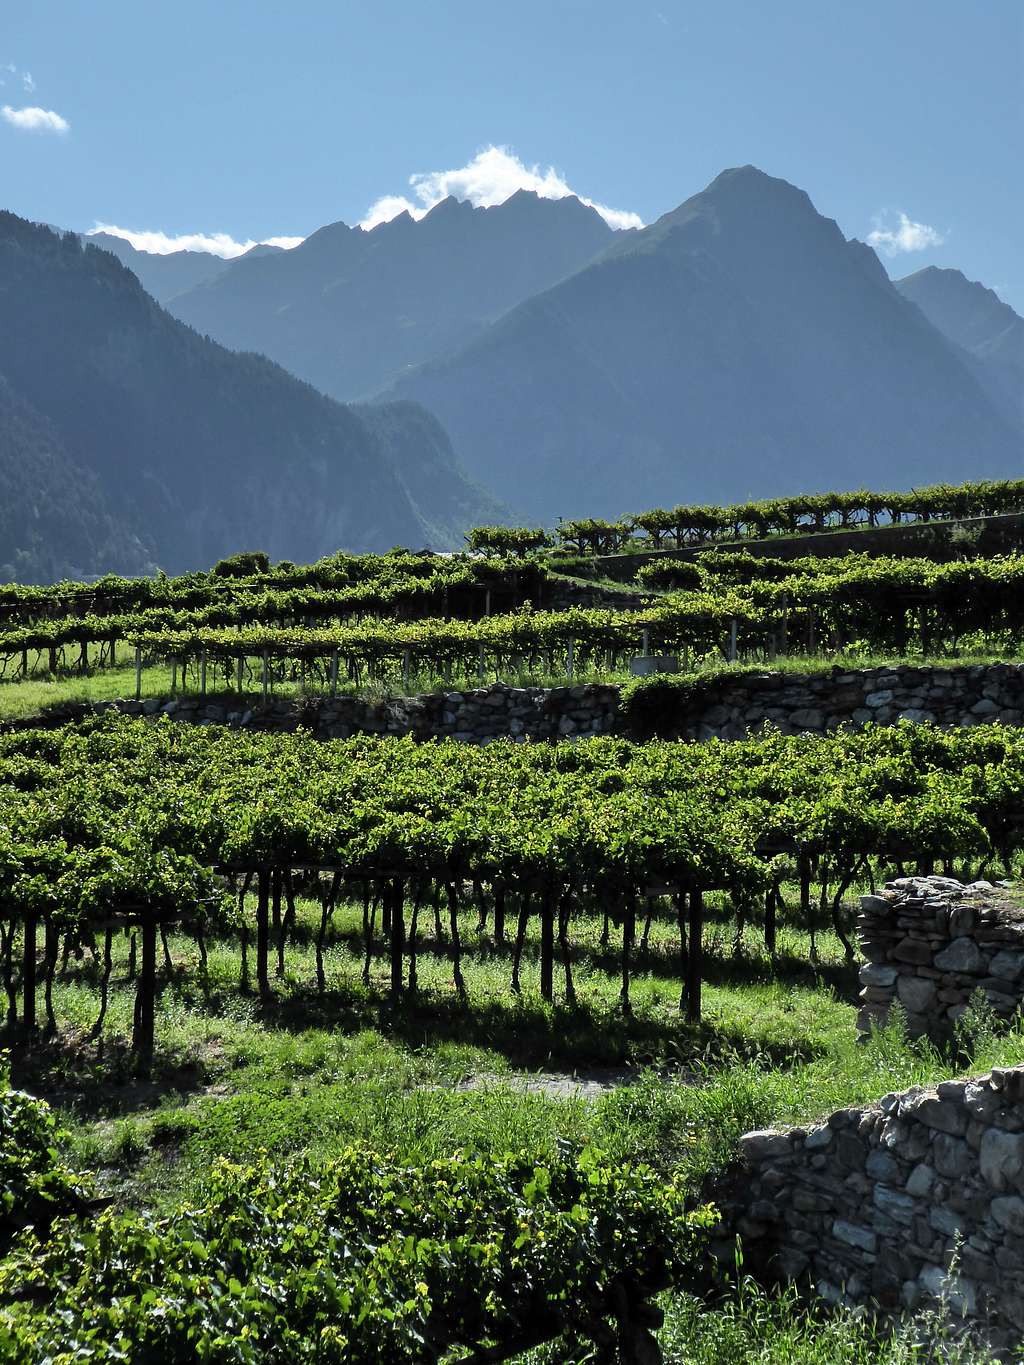 The highest alpine vineyards at Morgex-La Salle dominated by Crammont